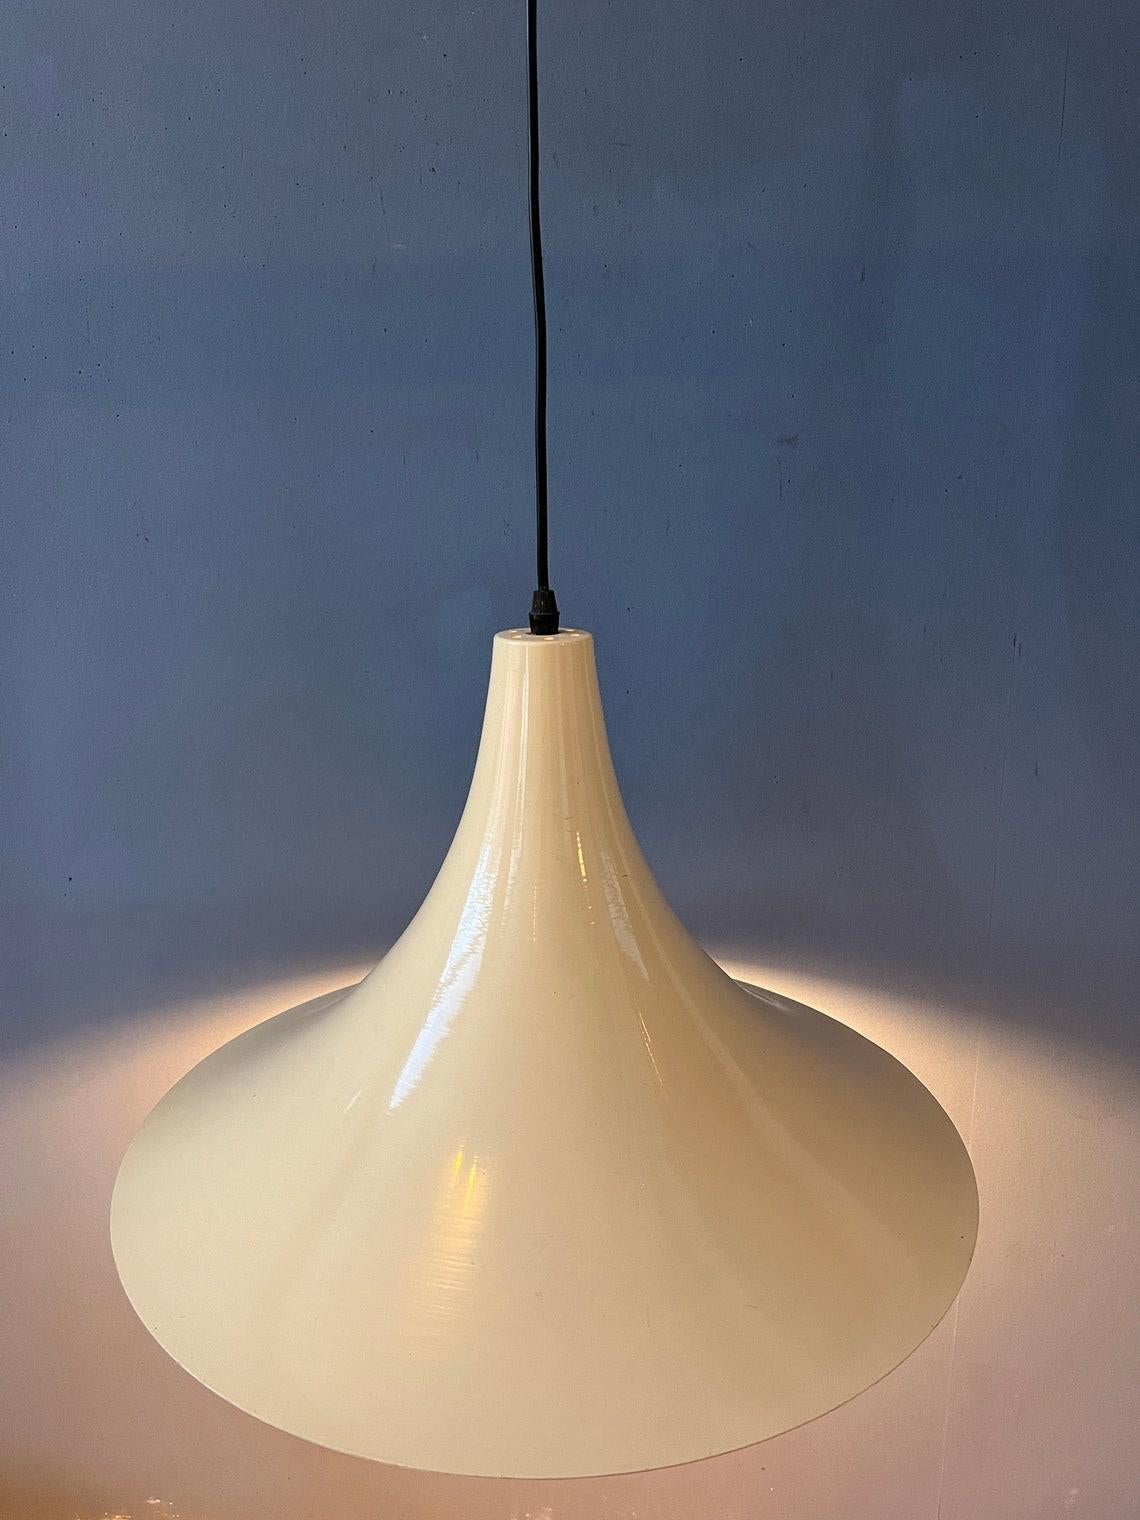 White mid century space age witch hat pendant lamp. The shade is made out of metal and has a white/beige lacquer. The lamp requires an E27 (E26) lightbulb.

Additional information:
Materials: Plastic
Period: 1970s
Dimensions:ø Shade: 37 cm
Height